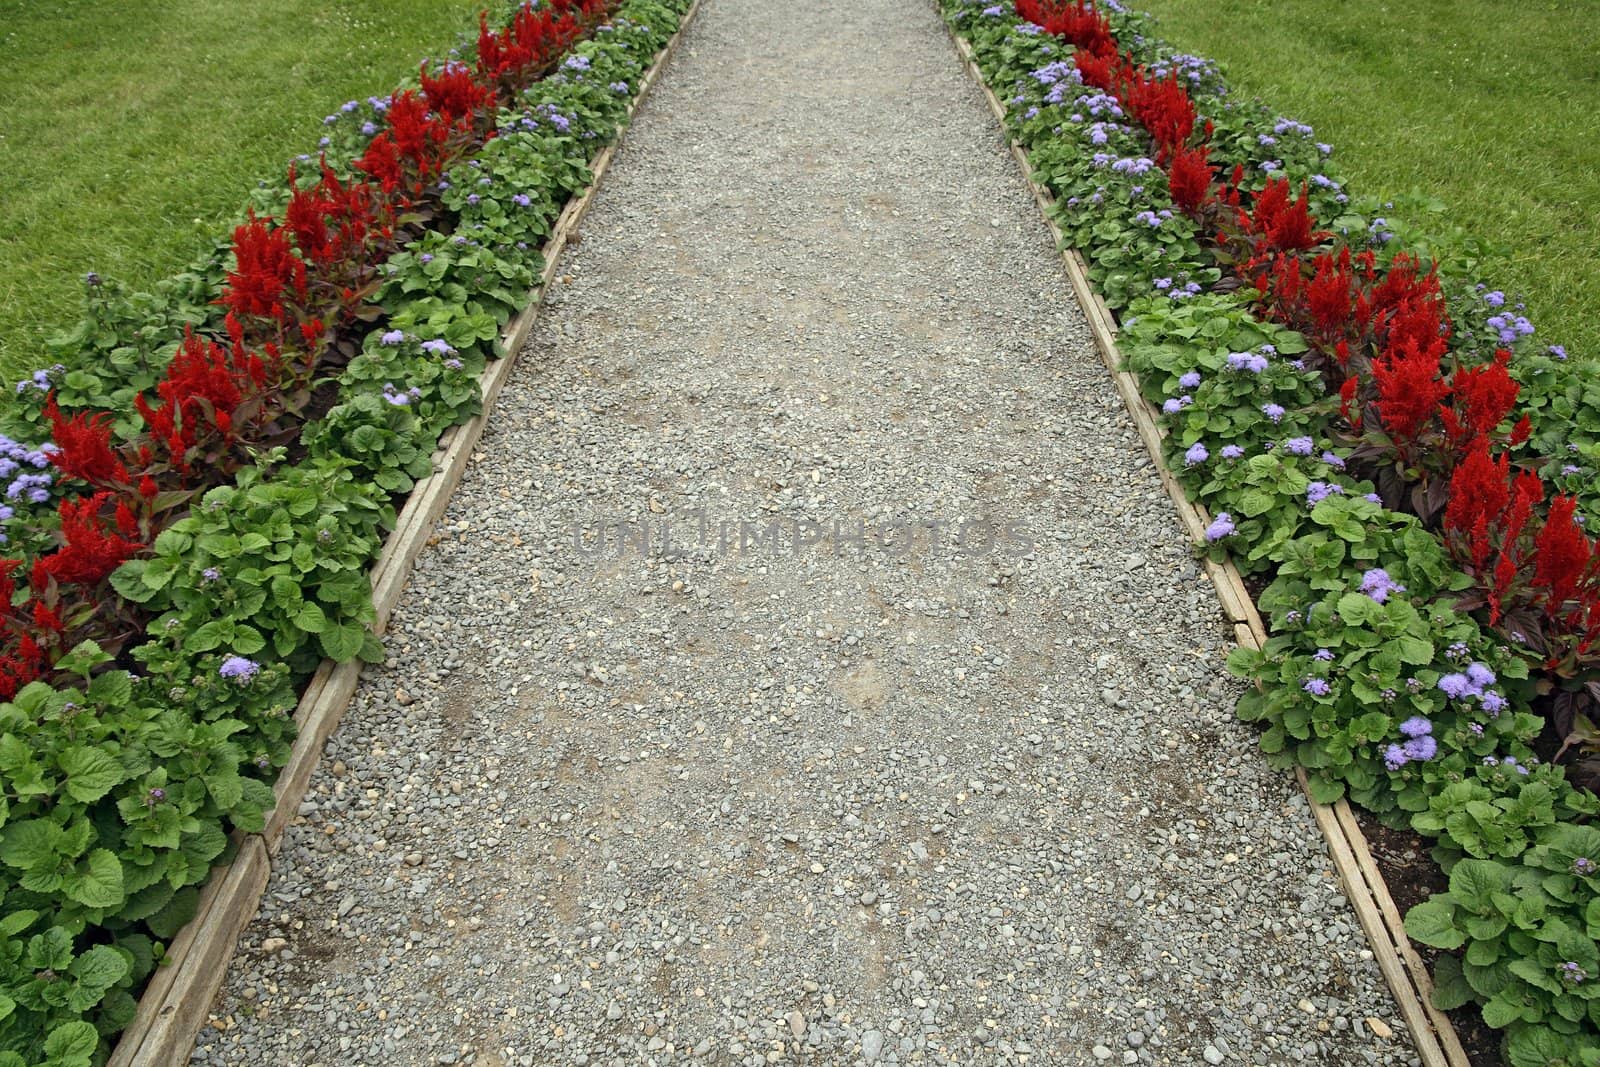 Gravel path surrounded by flowers, leading to a mansion.